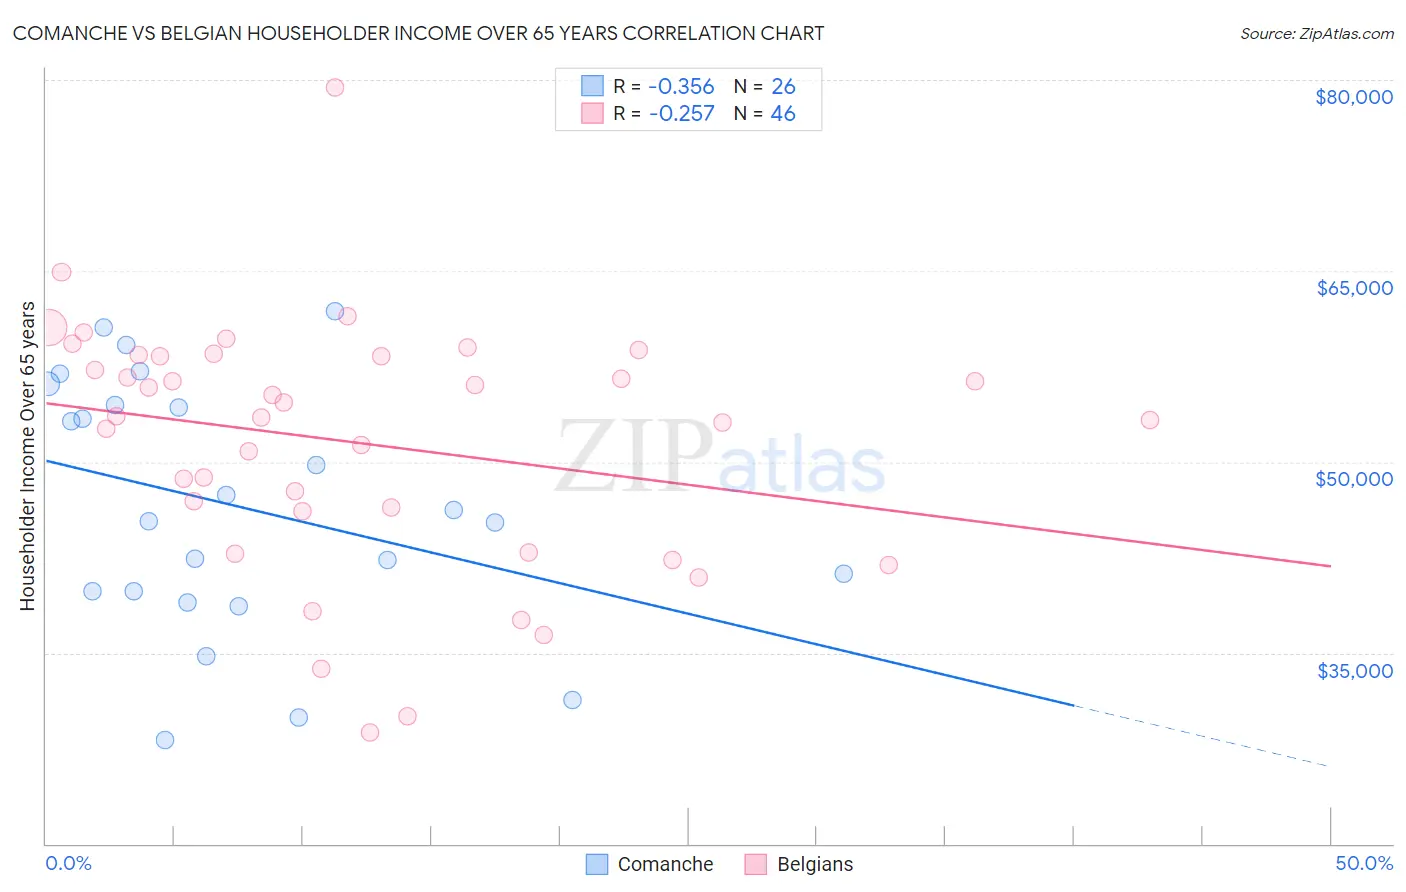 Comanche vs Belgian Householder Income Over 65 years